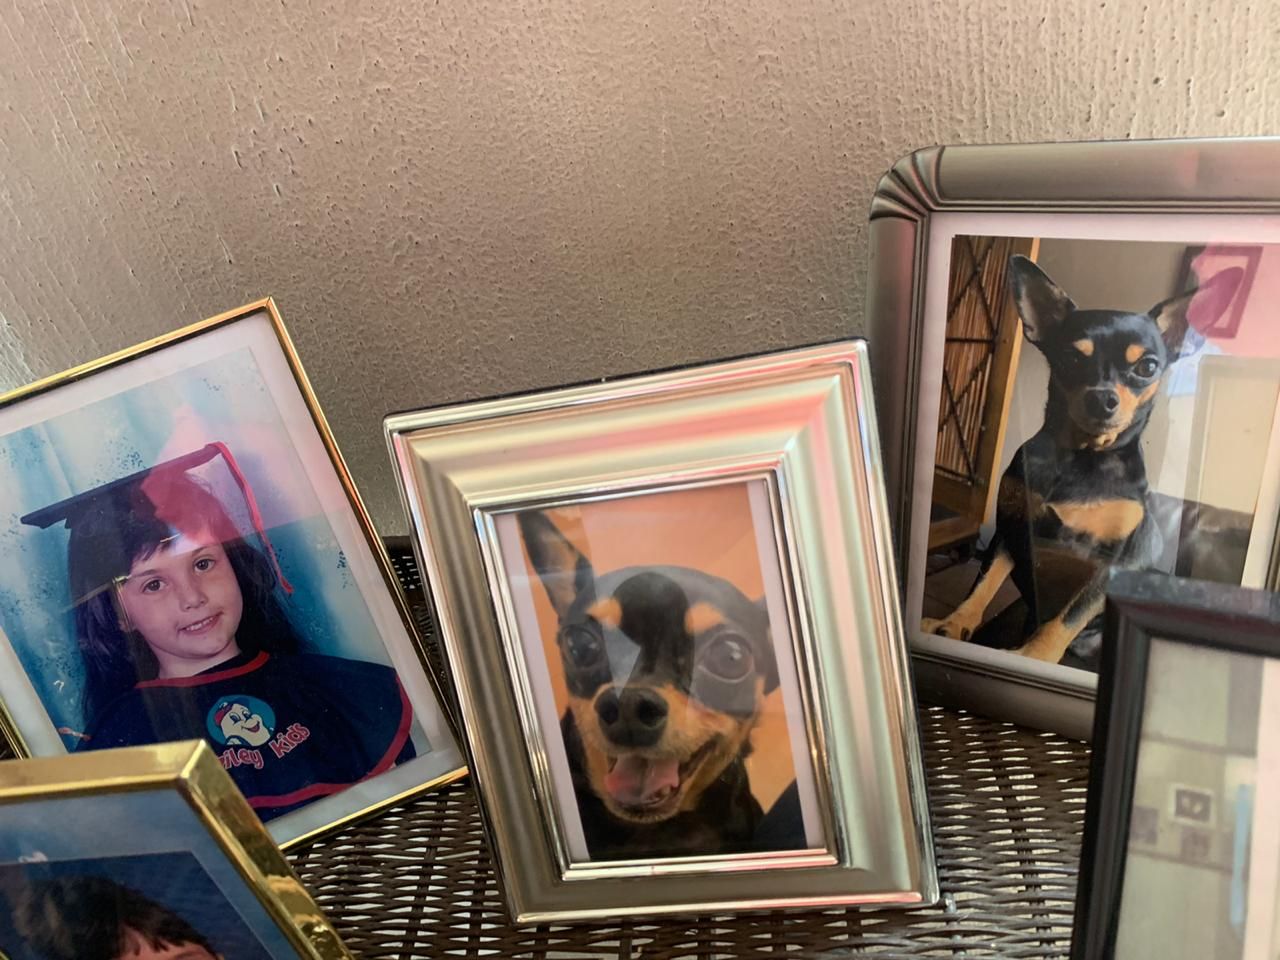 My best friend's parents are slowly but surely replacing her pictures with their dog